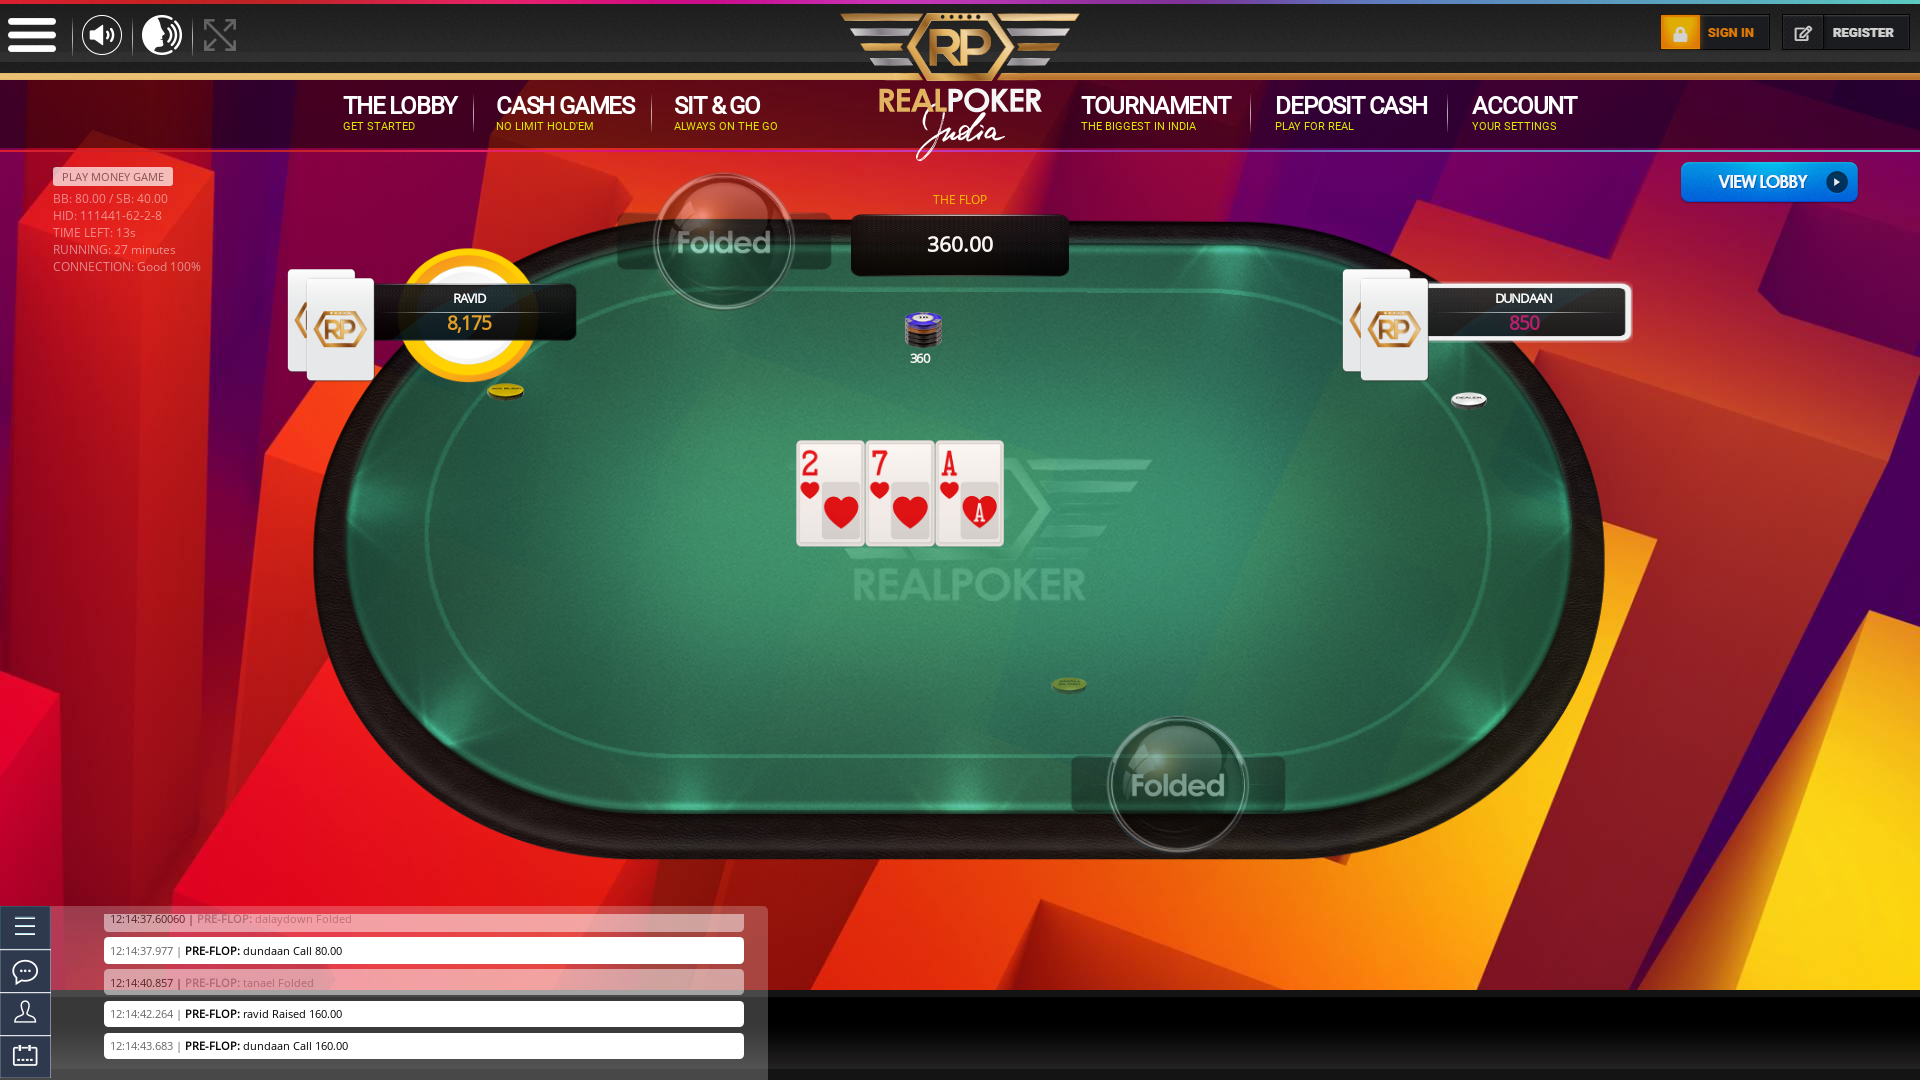 Indian online poker on a 10 player table in the 27th minute match up